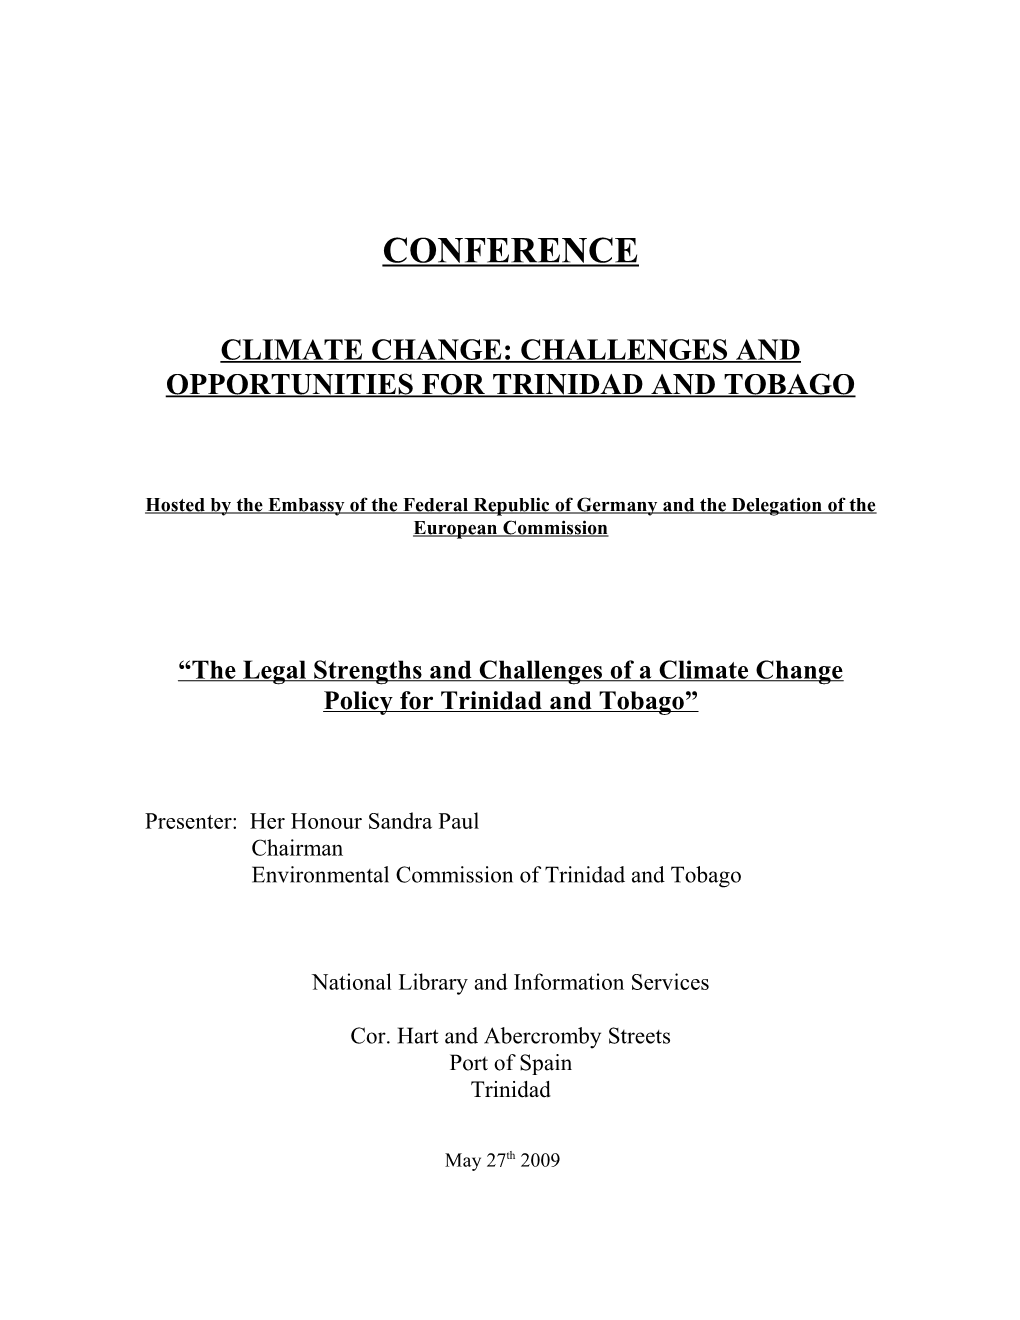 Climate Change: Challenges and Opportunities for Trinidad and Tobago